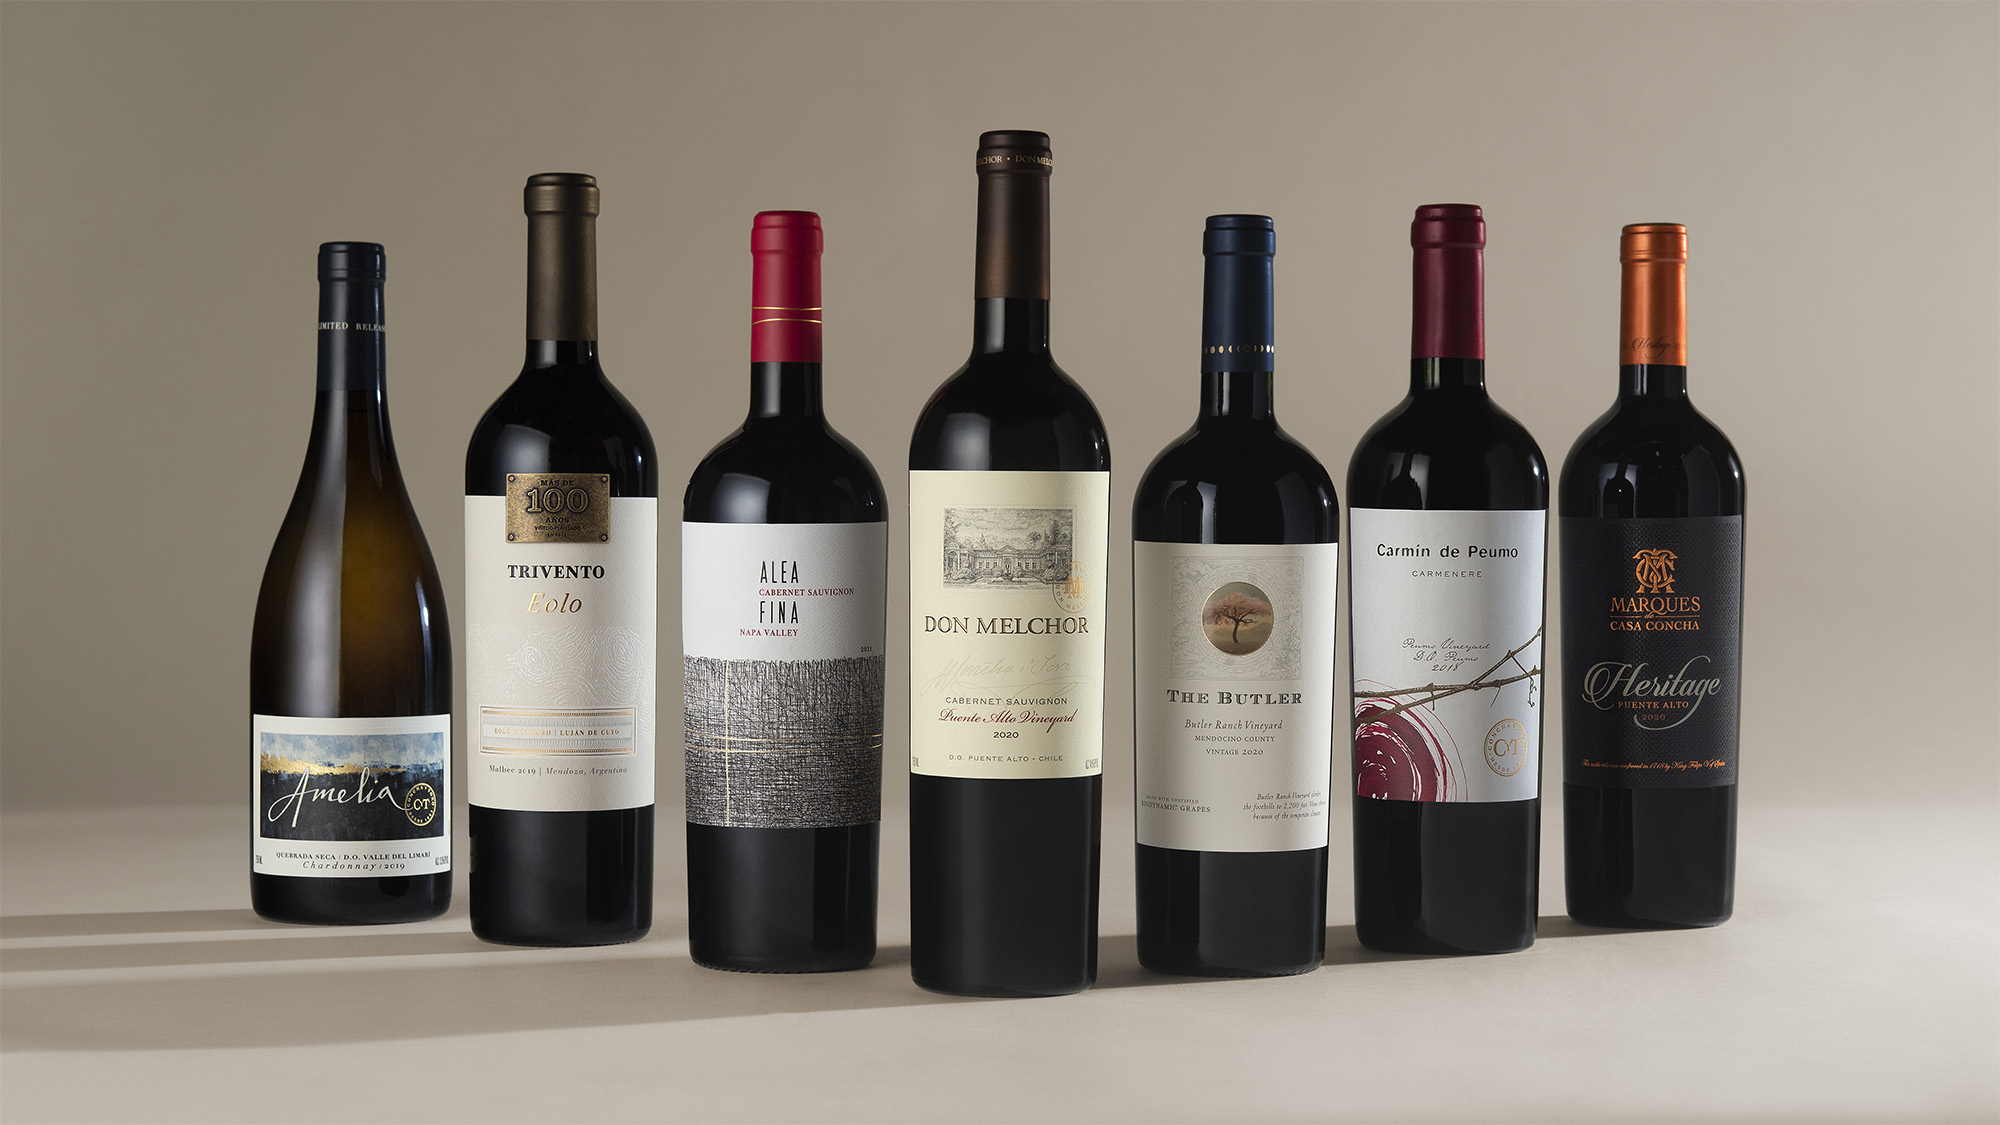 A studio photograph of seven bottles of wine from various vineyards positioned in a line. The studio background is a cool beige. 